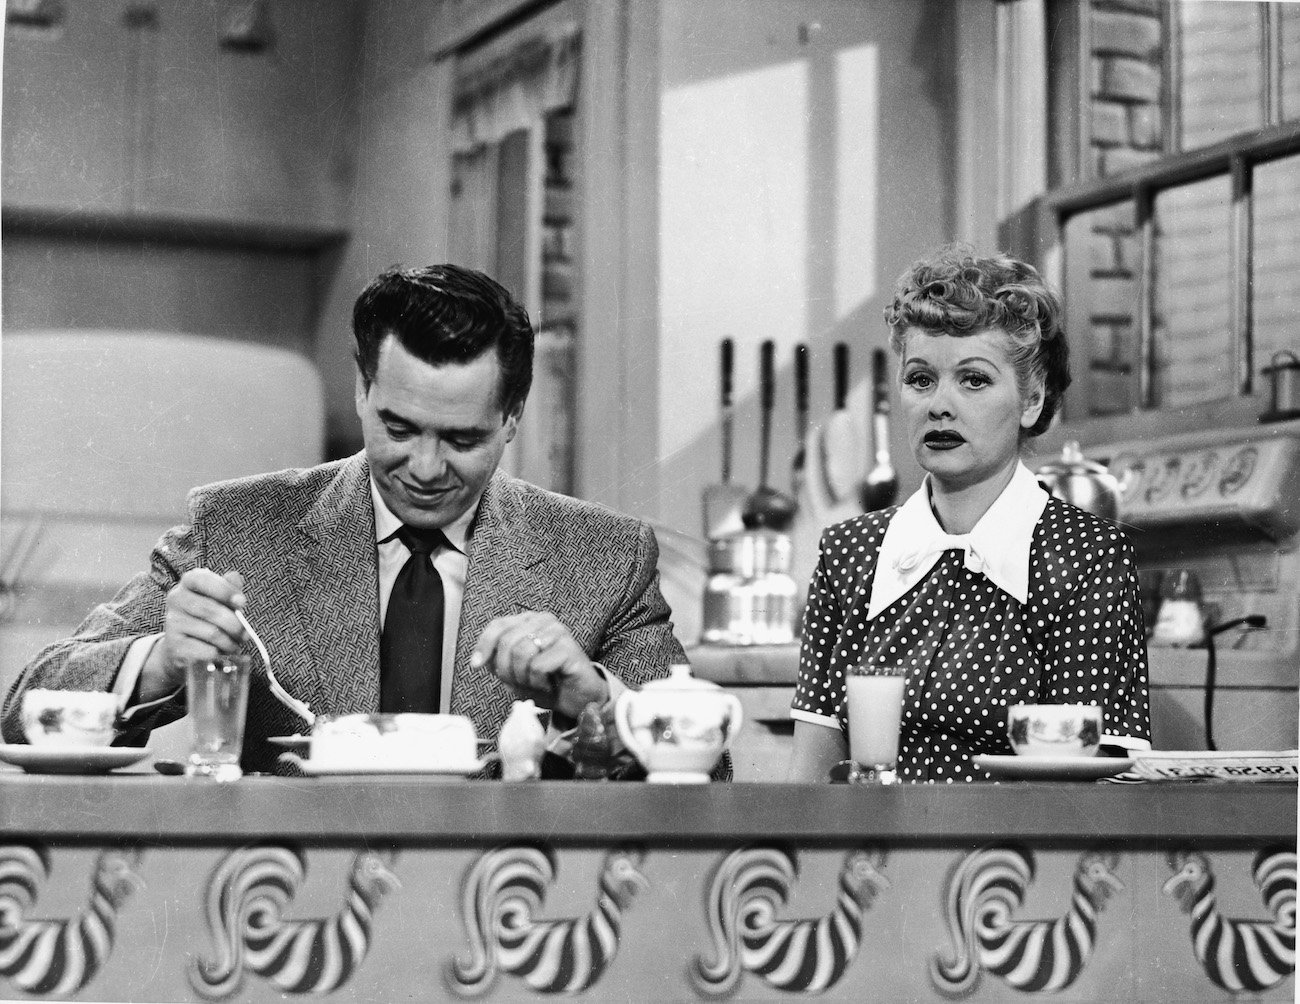 I Love Lucy Lucille Ball Blamed Desi Arnaz S Infidelity And Drinking For Their Divorce He